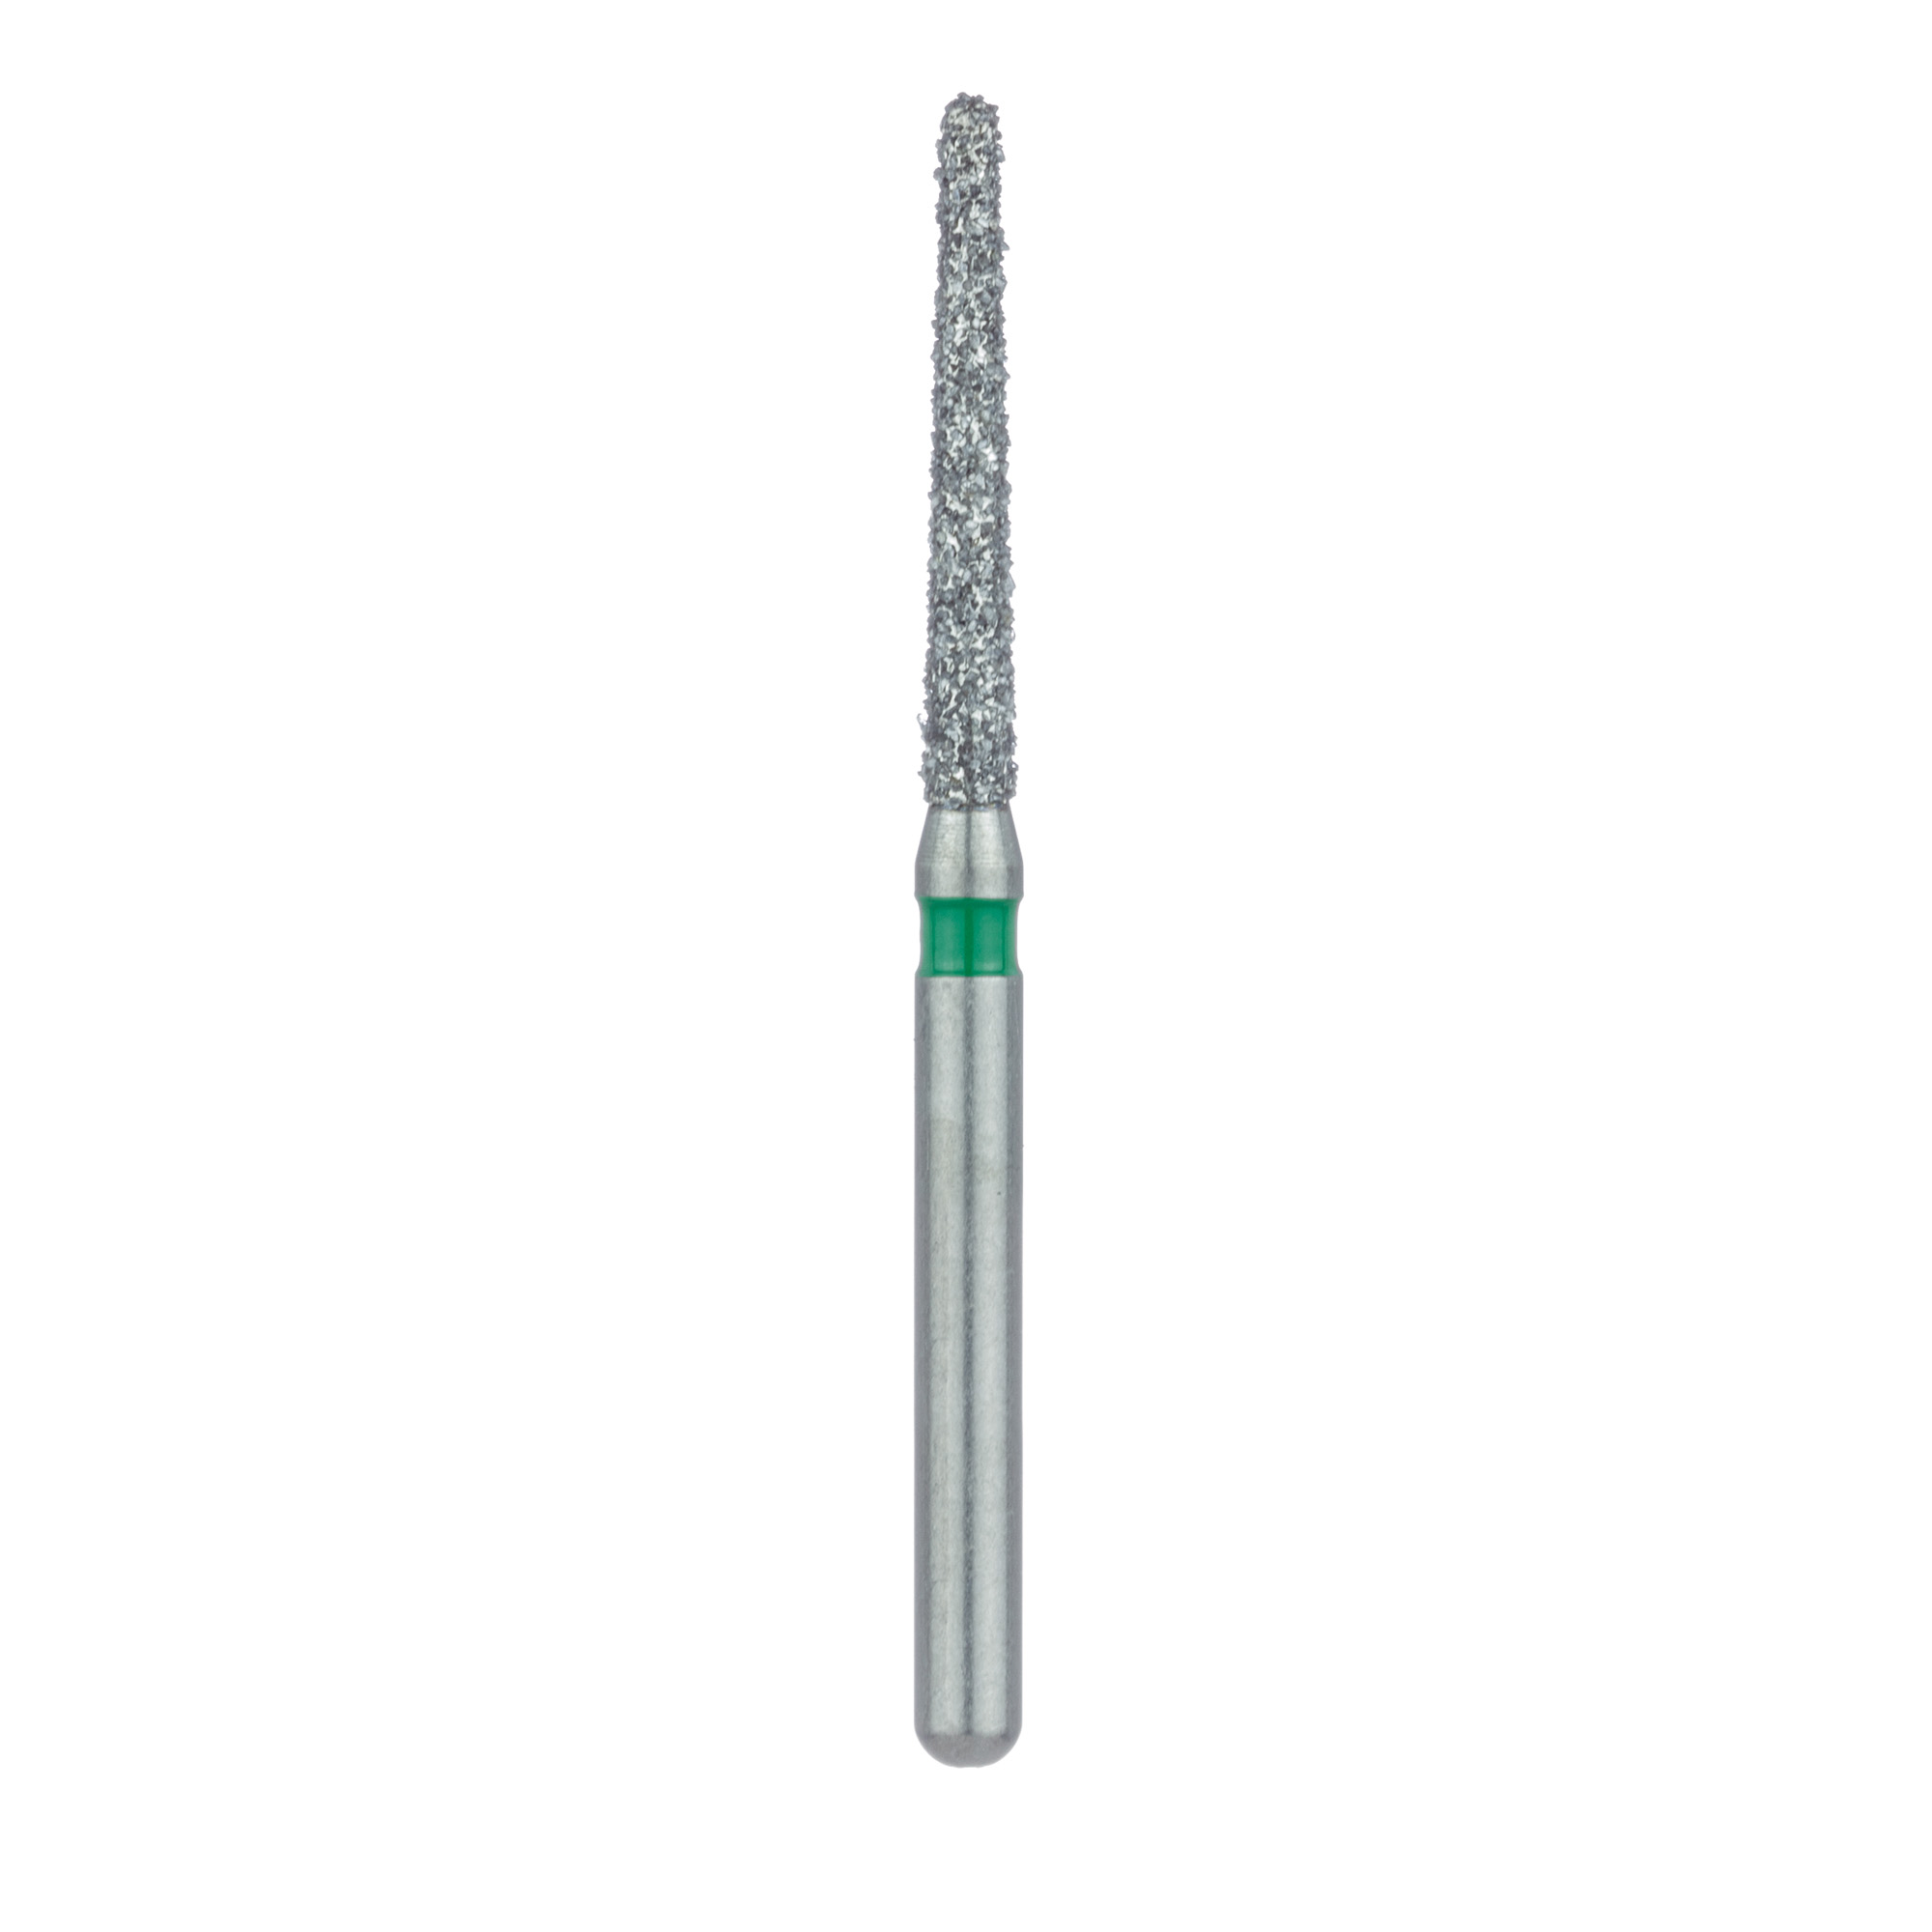 1114.10C Single-Use Diamond Bur, Sterile, 25 Pack, 1.4mm Ø, Tapered, Round End, 10mm Working Length, Coarse, FG